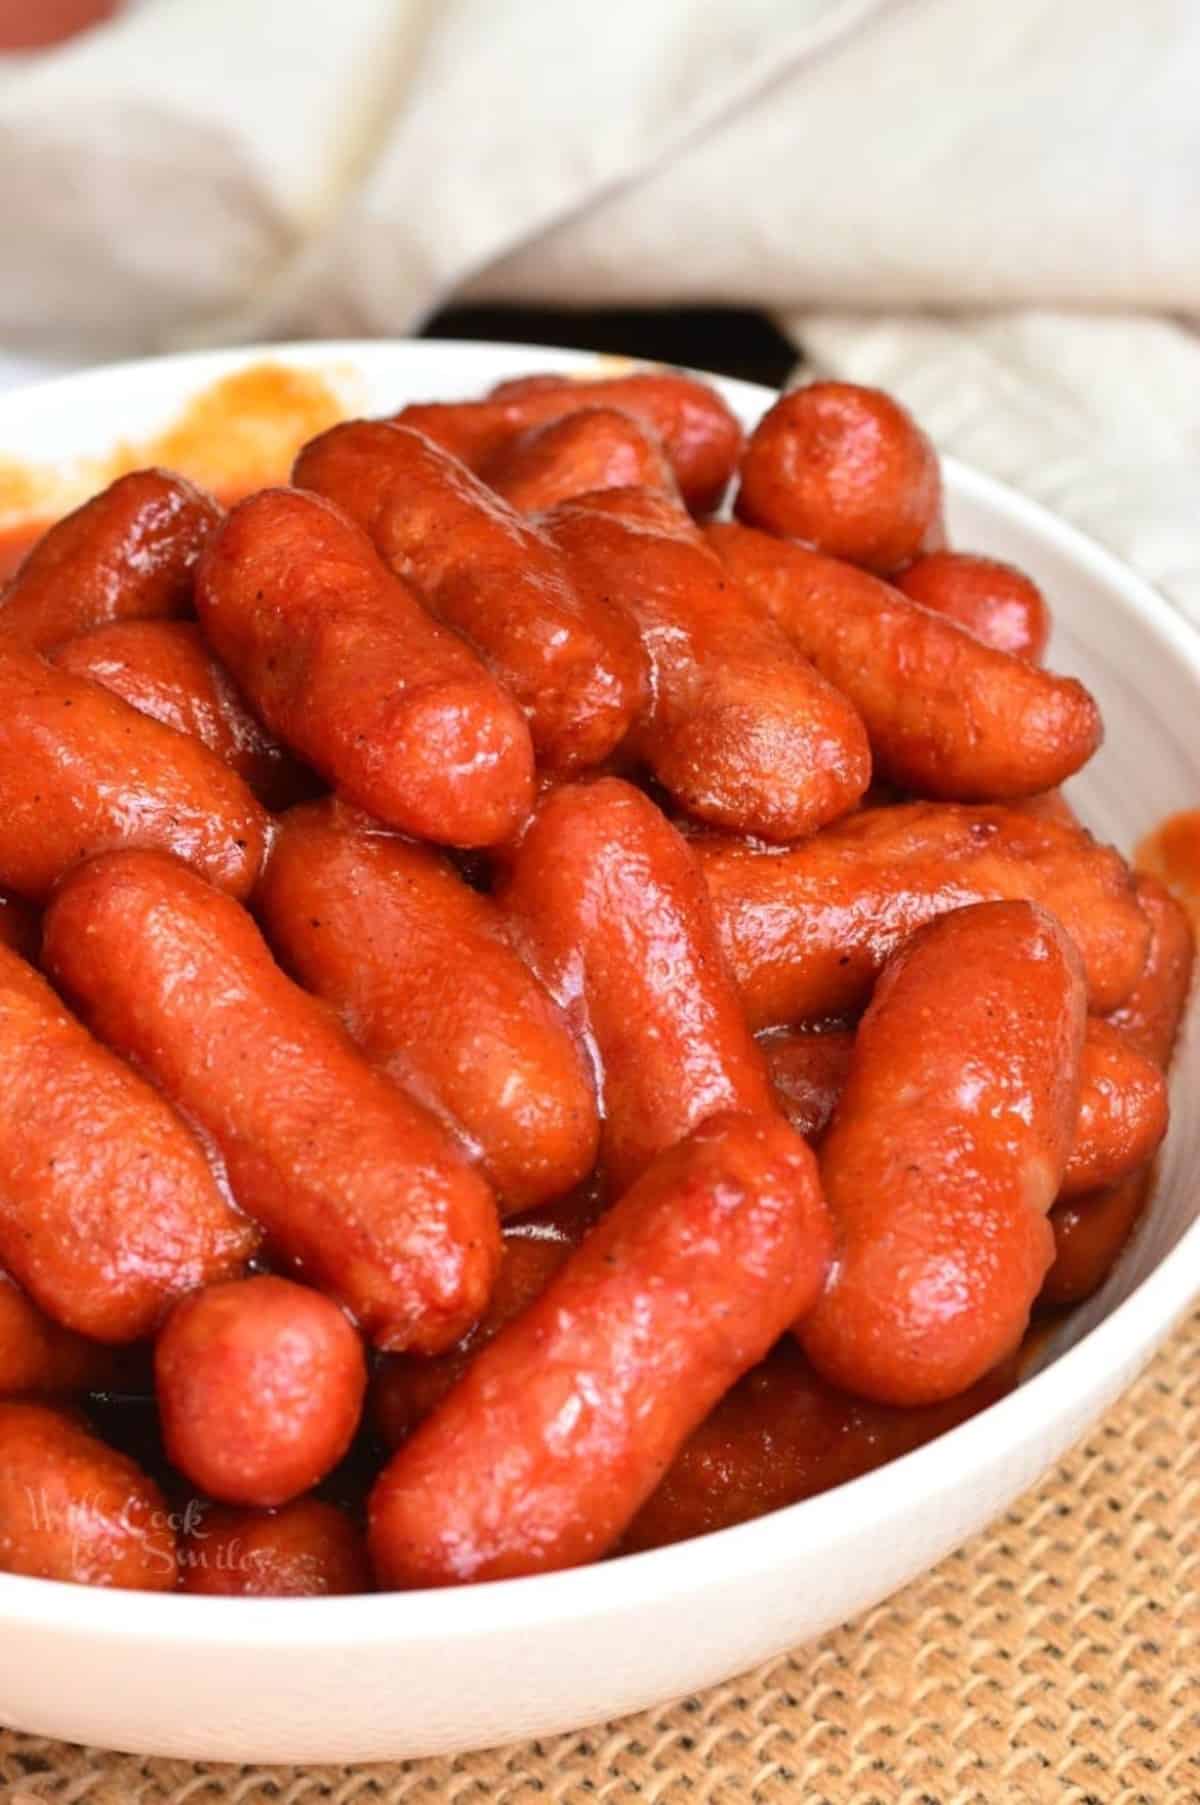 Crockpot bbq little smokies and VIDE) - Only 3 simple ingredients!